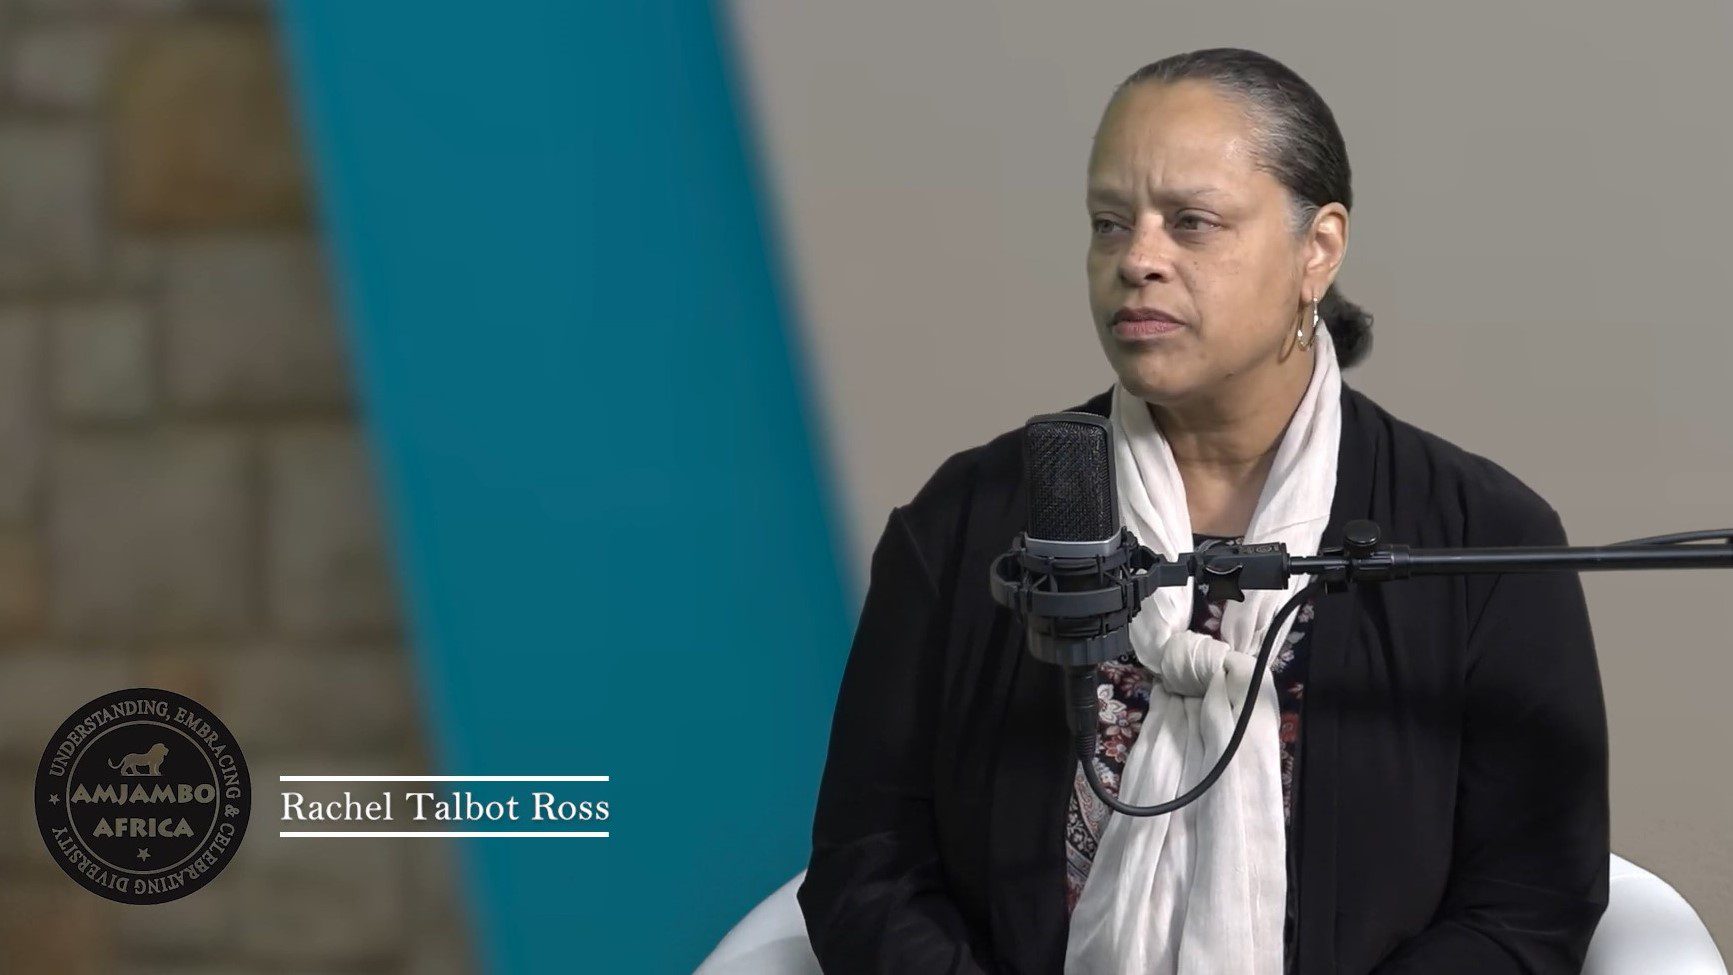 House Speaker Rachel Talbot Ross talks about being a Black person in Maine, housing crisis